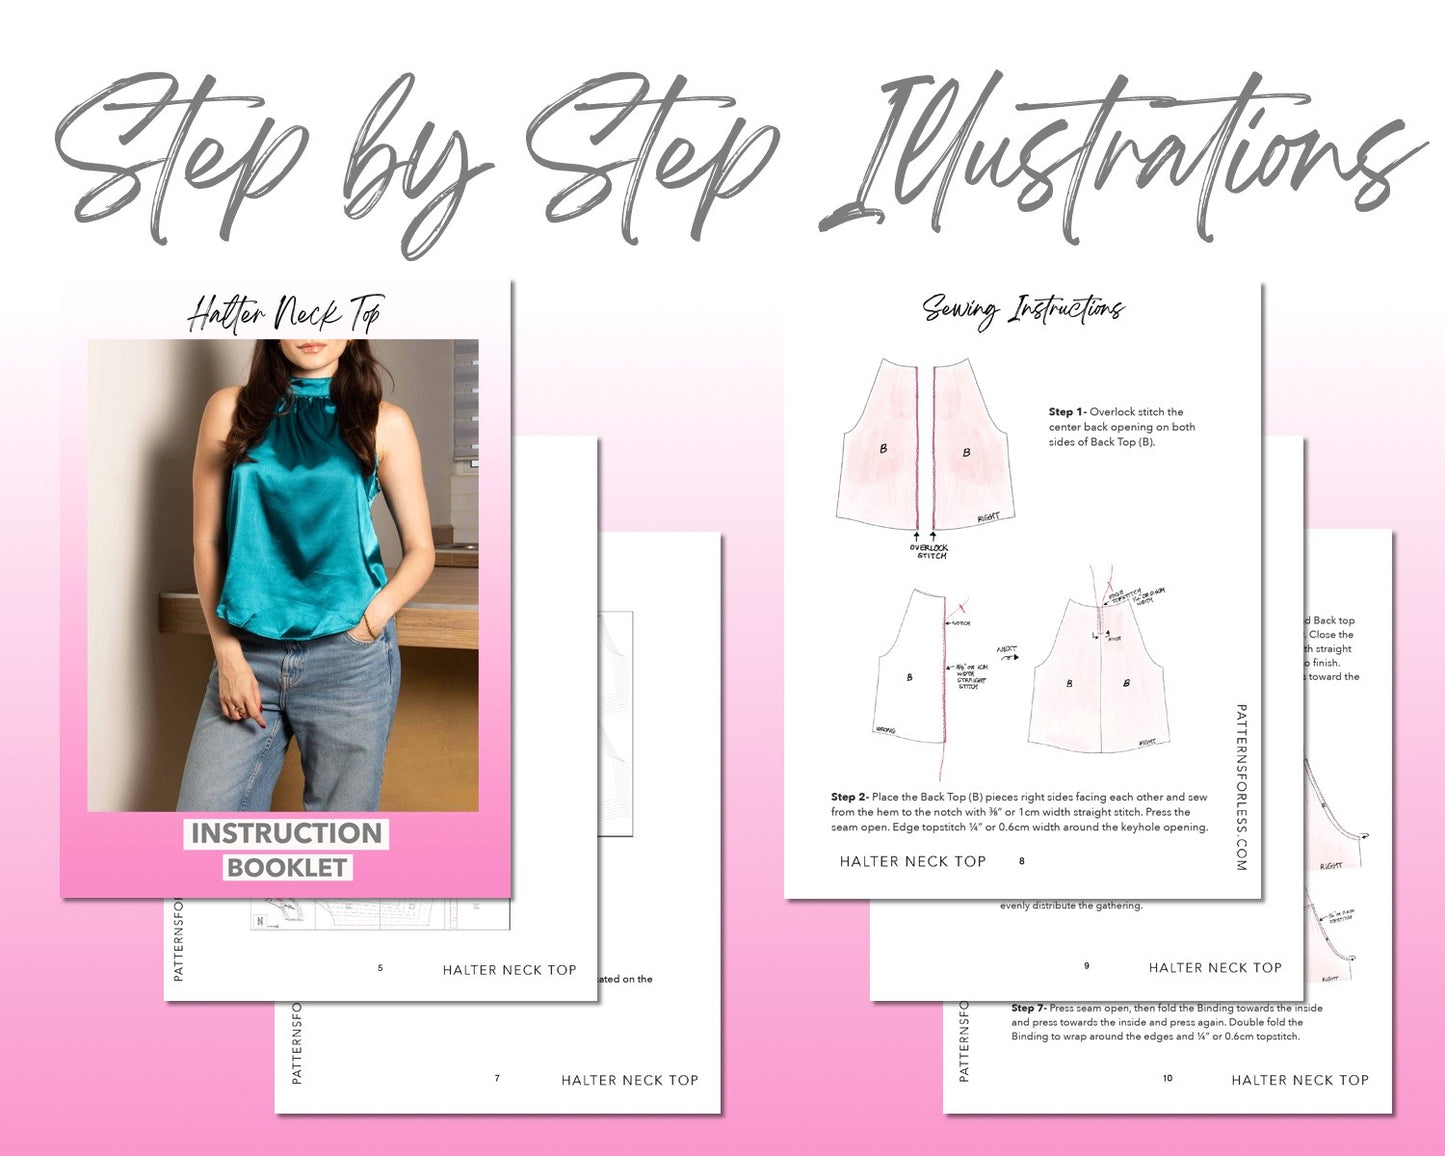 Halter Neck Top sewing pattern step by step illustrations.